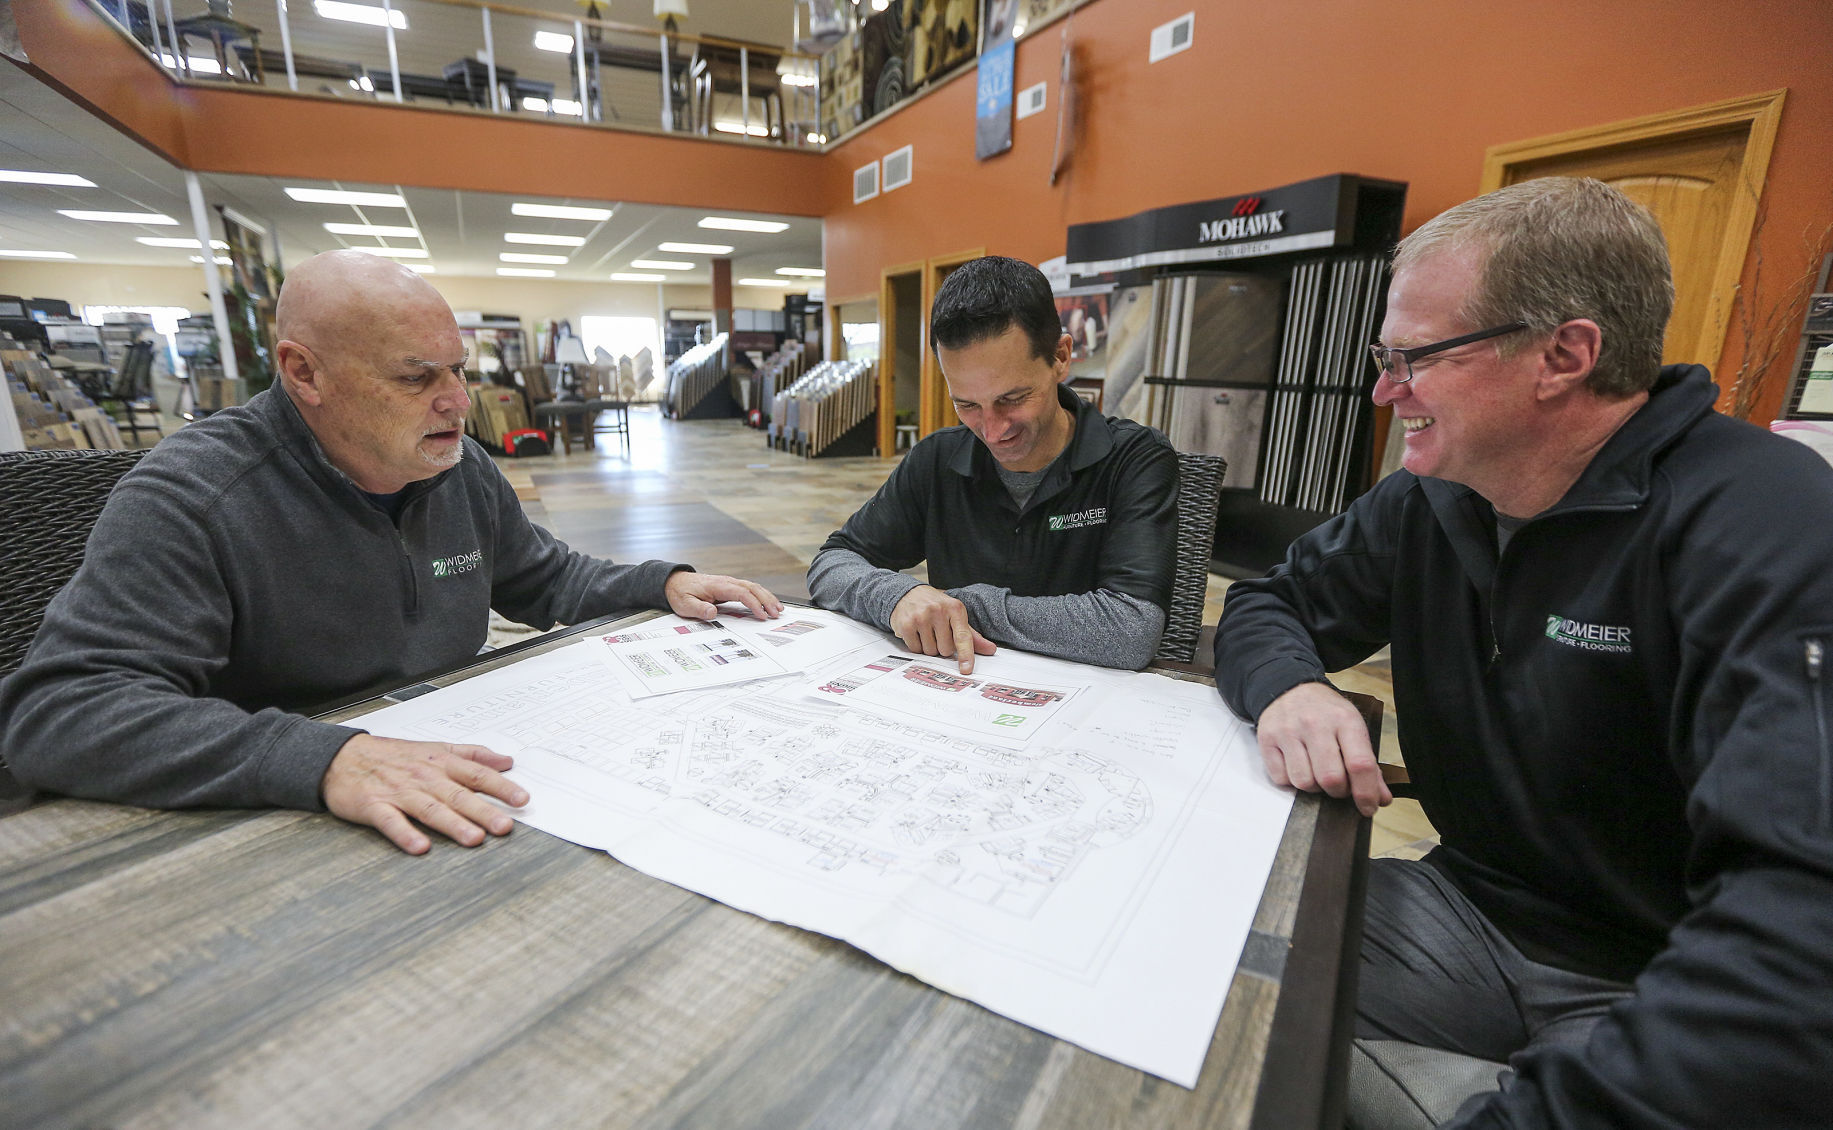 Joe Widmeier (center) along with his employees Brian Blodgett (left) and Bob Duax look over the plans for the new location of the Dubuque store. PHOTO CREDIT: Dave Kettering